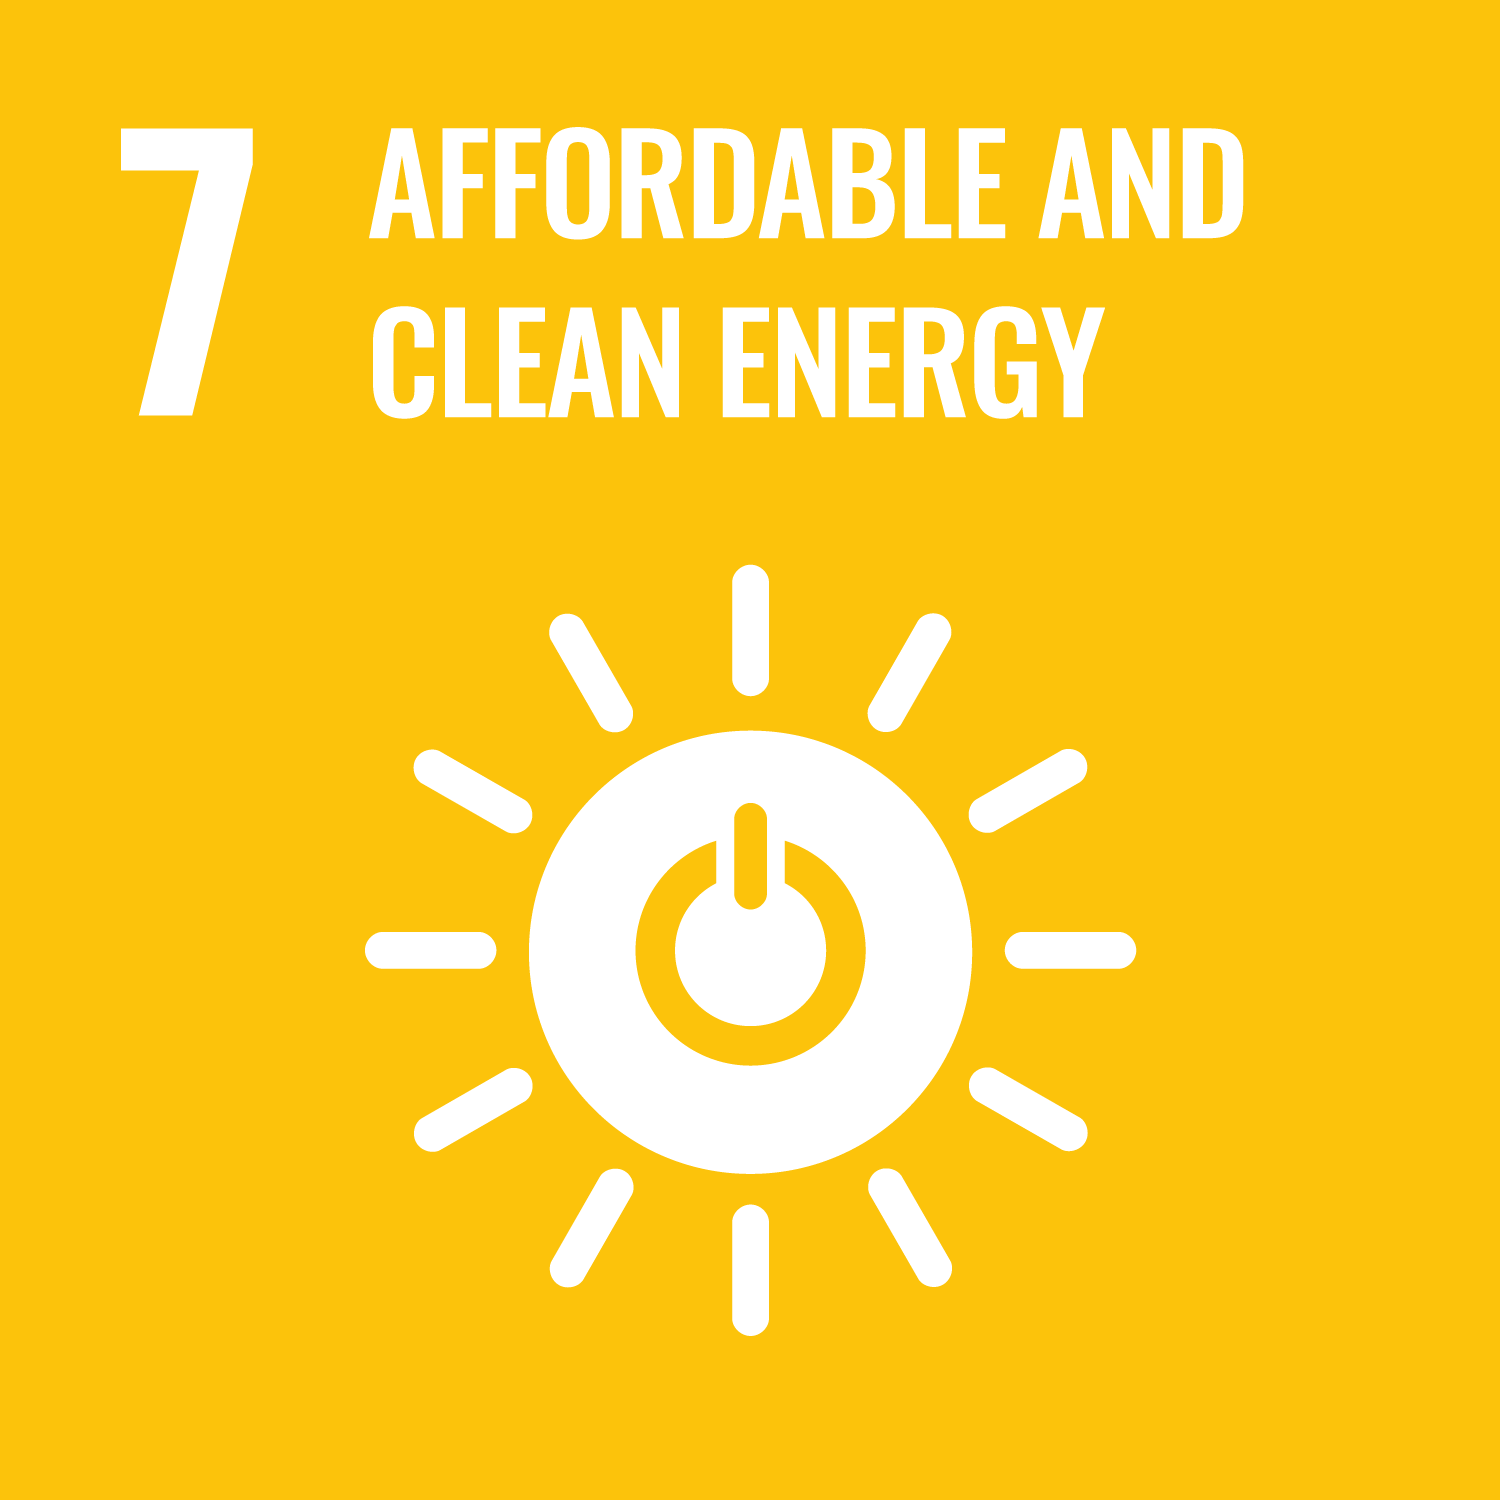 Logo of SDG 7, affordable and clean energy representing a switch button on the sun